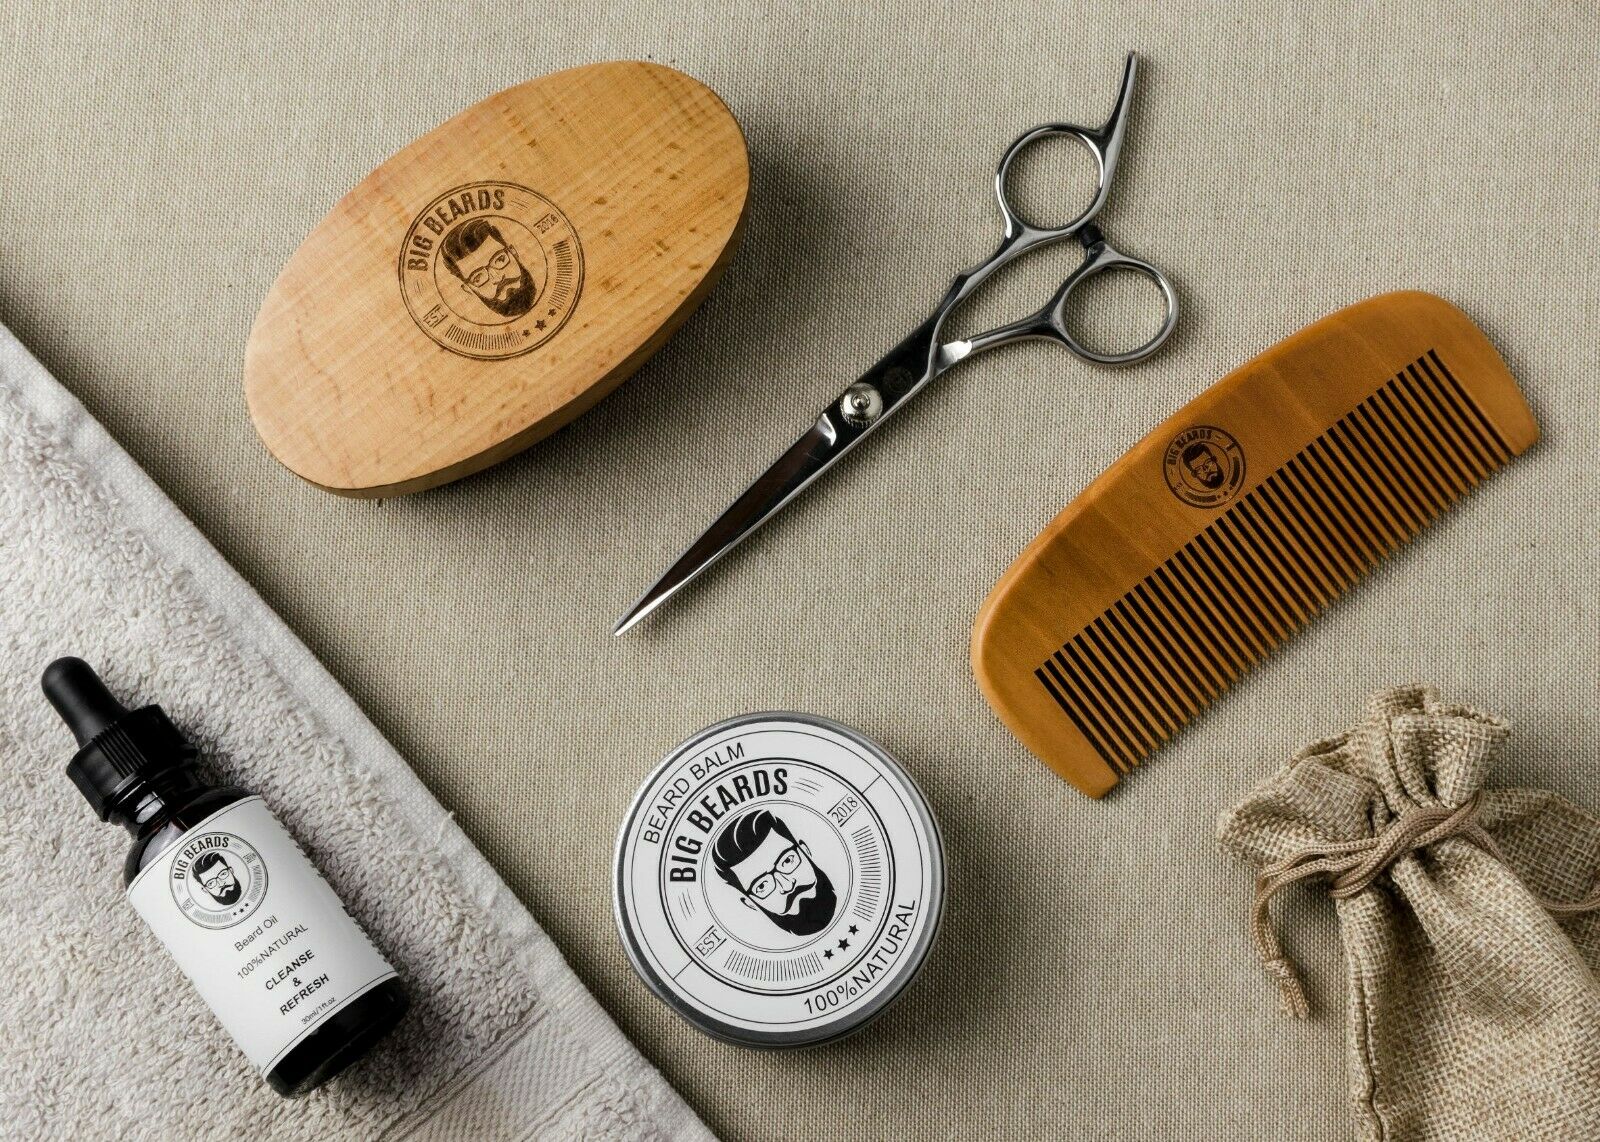 best beard grooming products